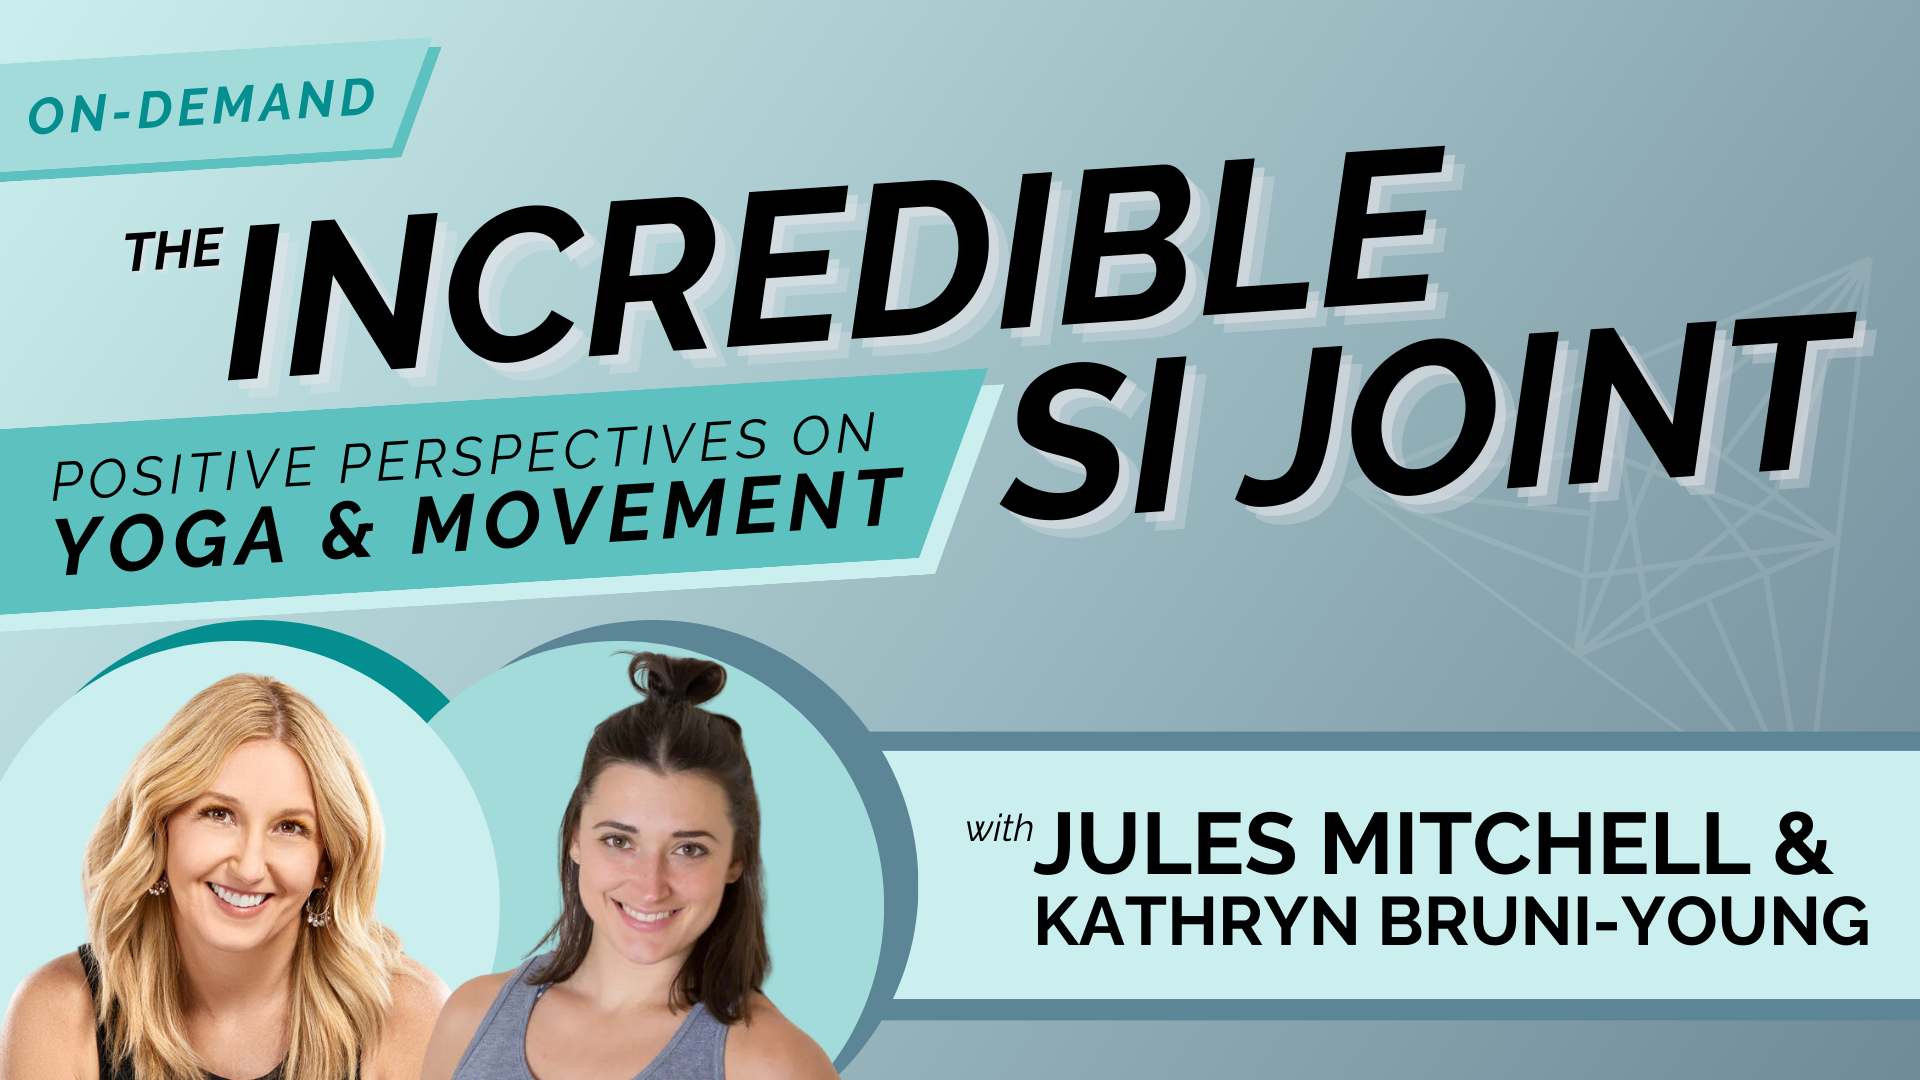 The Incredible SI Joint: Positive Perspectives on Yoga & Movement, with Jules Mitchell & Kathryn Bruni-Young